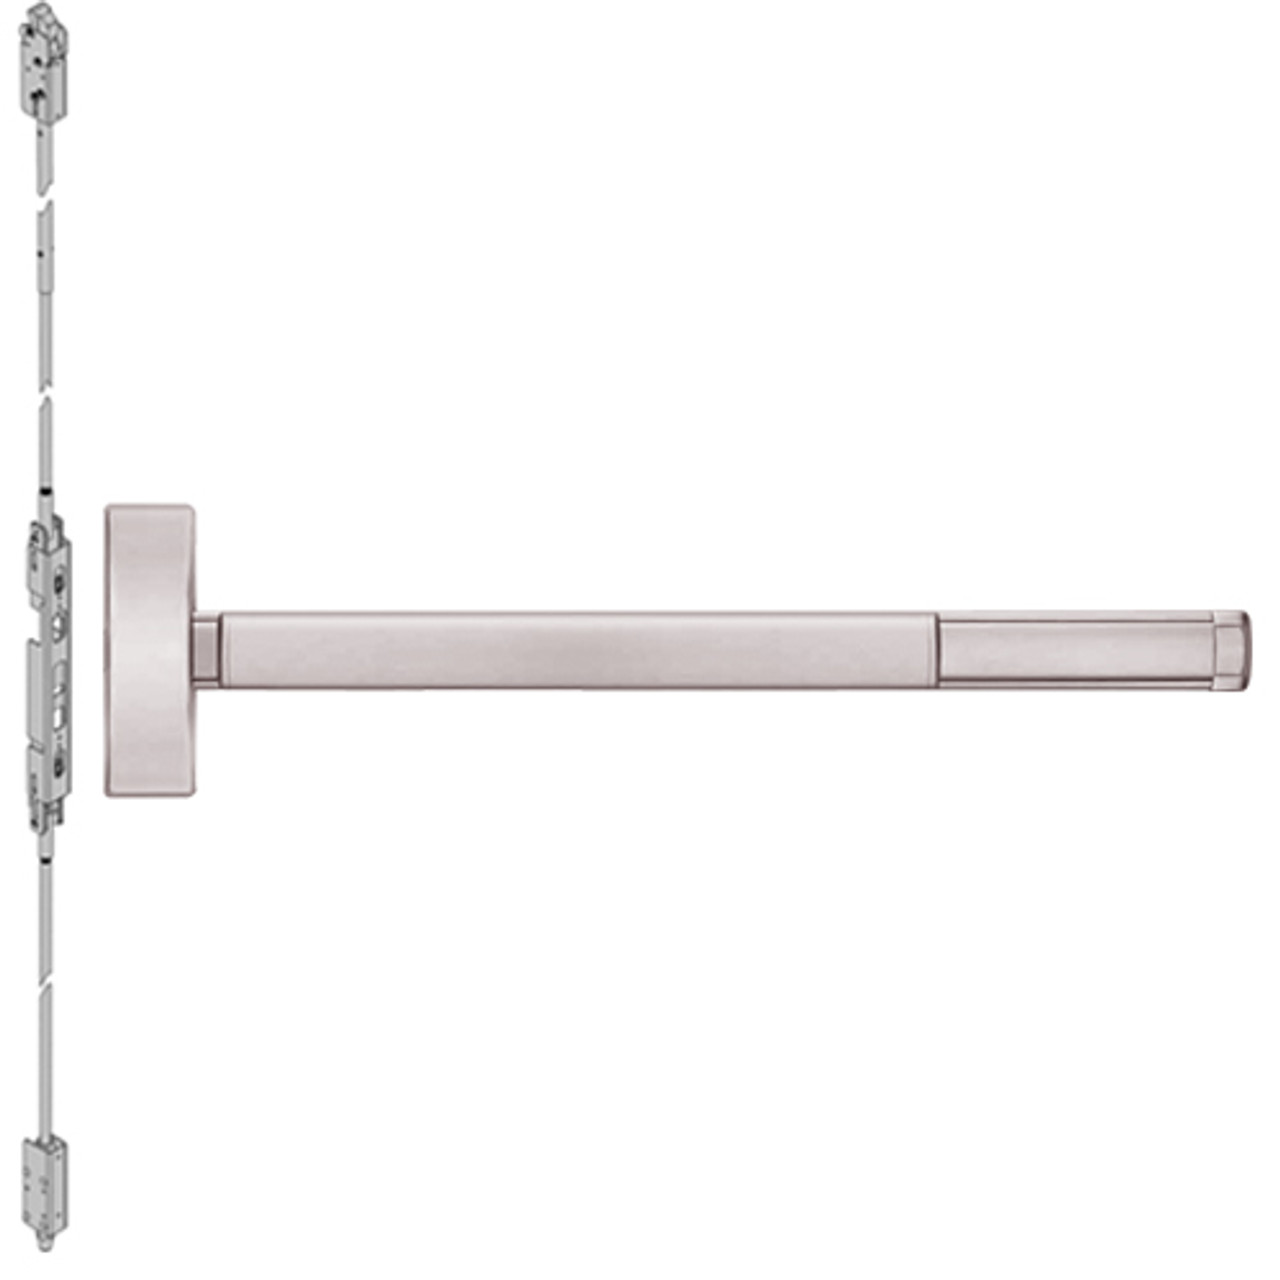 DE2802-628-36 PHI 2800 Series Concealed Vertical Rod Exit Device with Delayed Egress Prepped for Dummy Trim in Satin Aluminum Finish